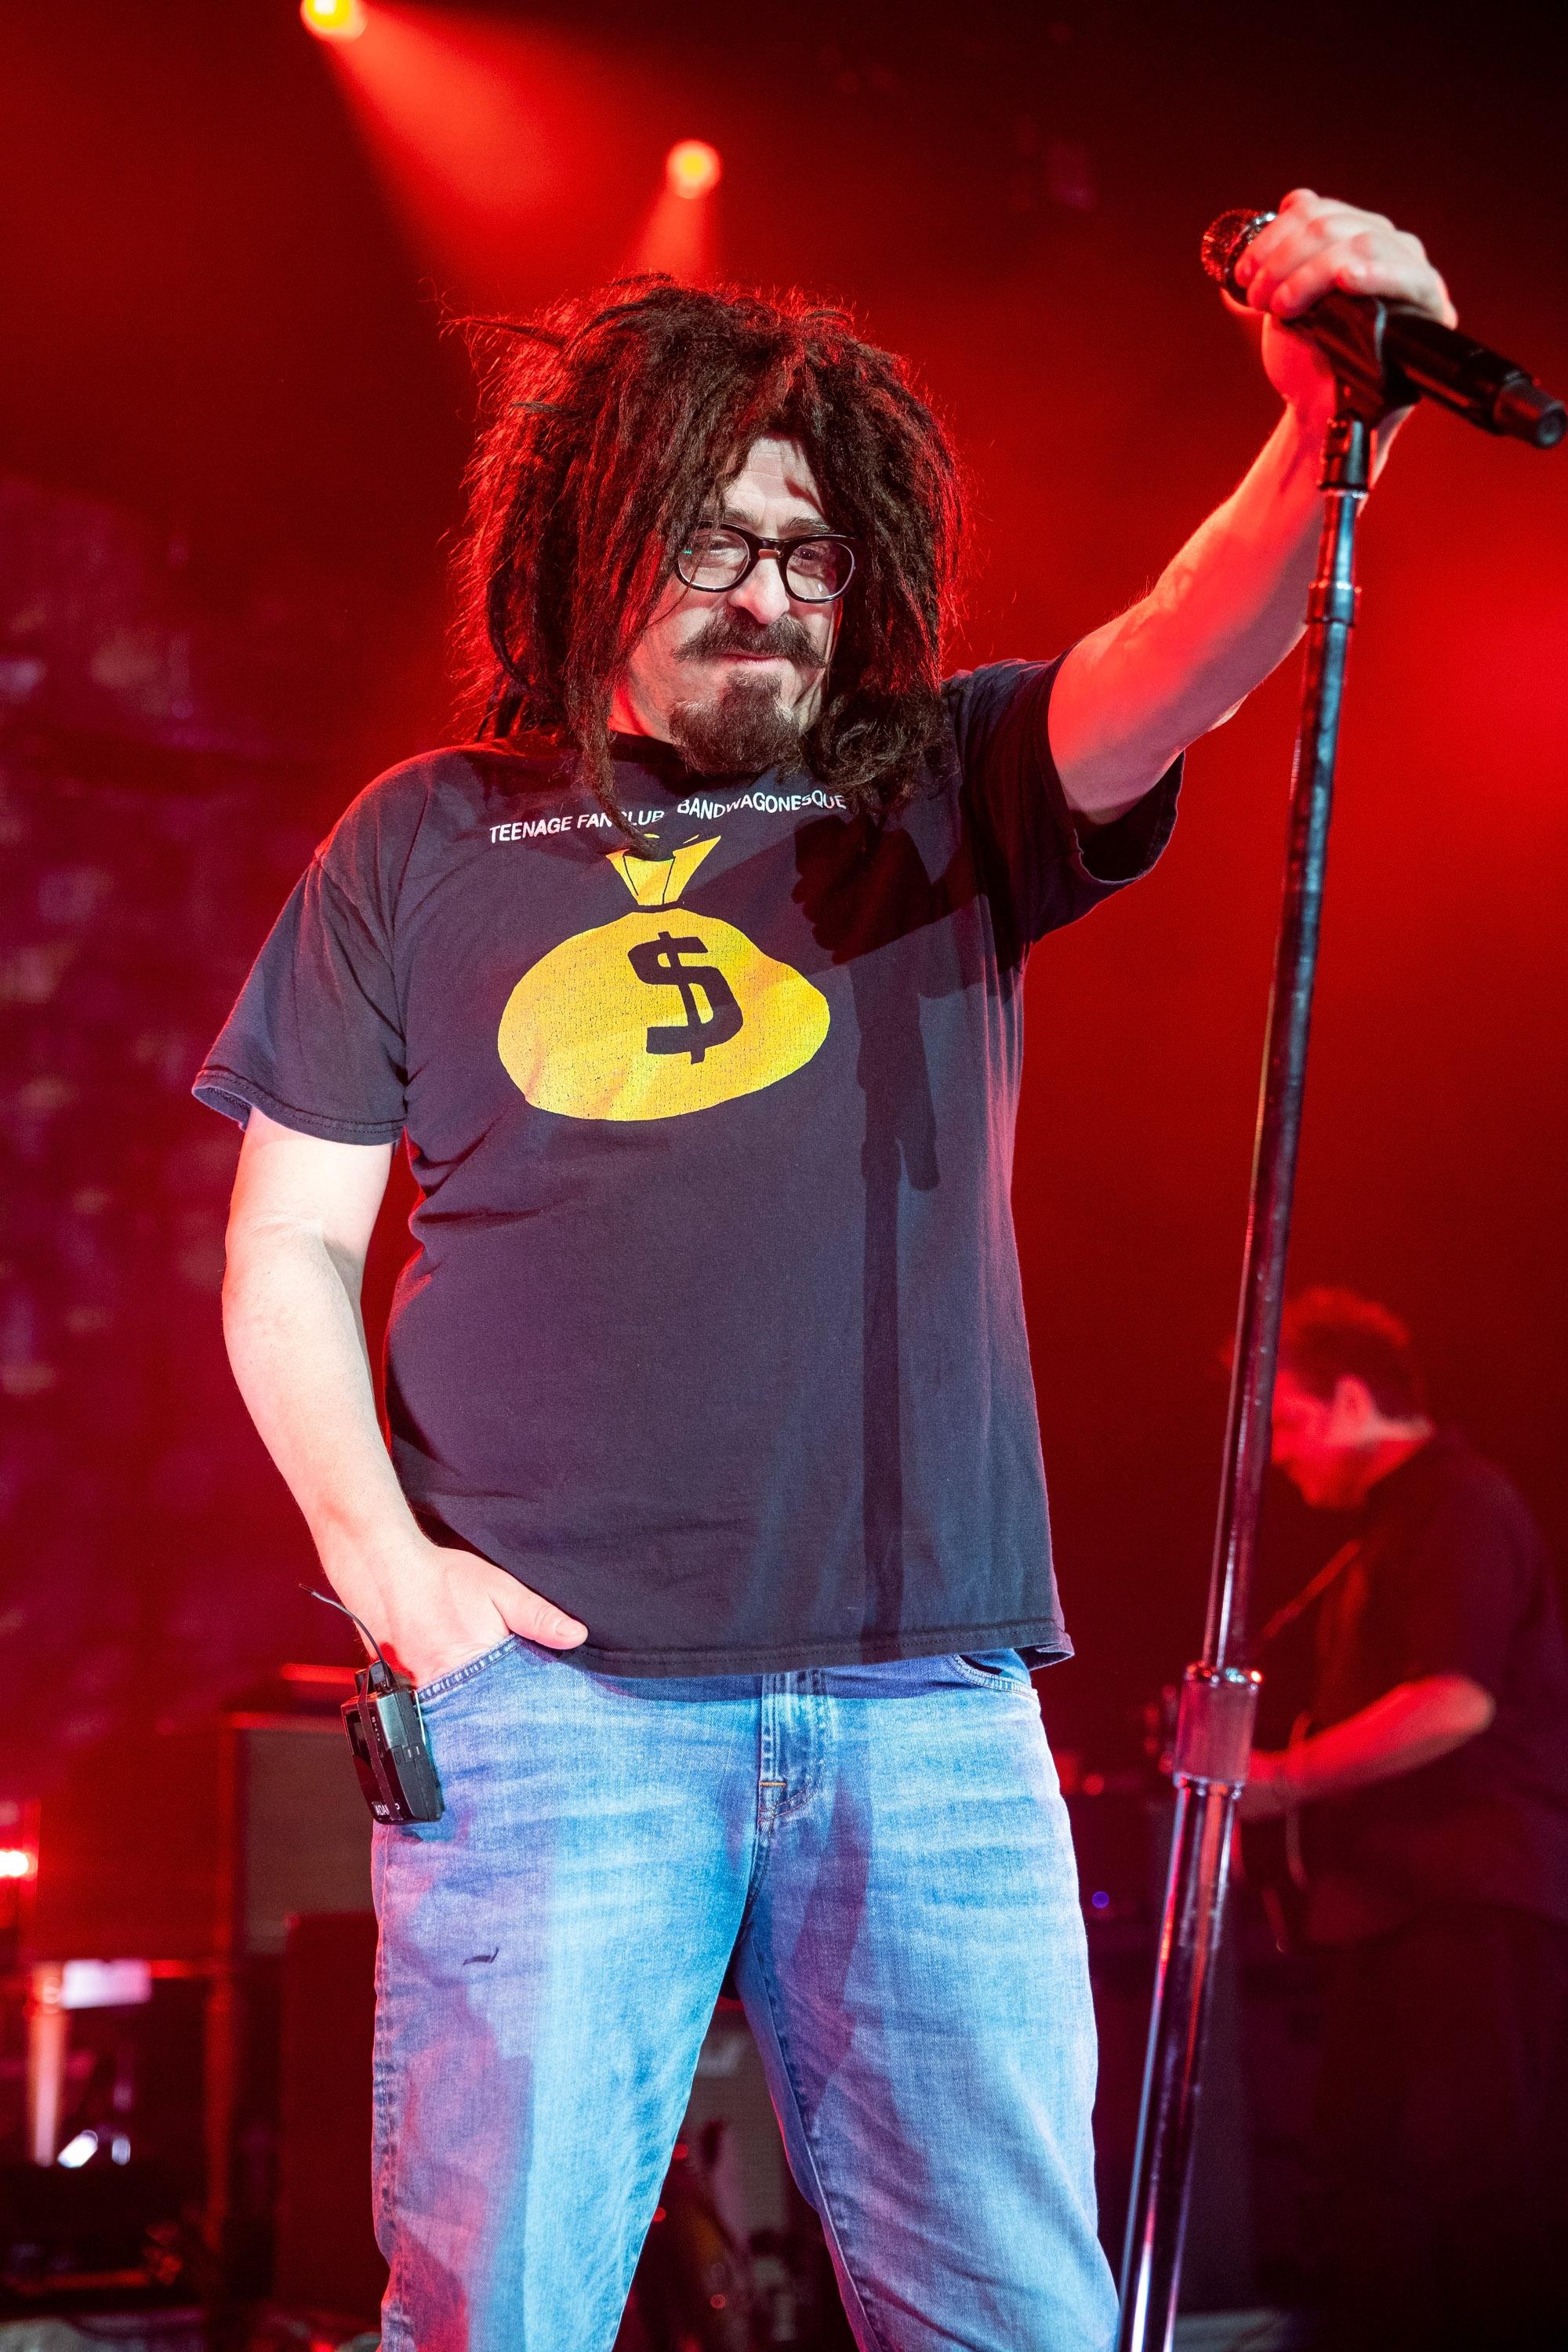 HD wallpaper, Tragic Musician Deaths, Counting Crows, 2000X3000 Hd Phone, Sun Interview, Phone Hd Counting Crows Background Photo